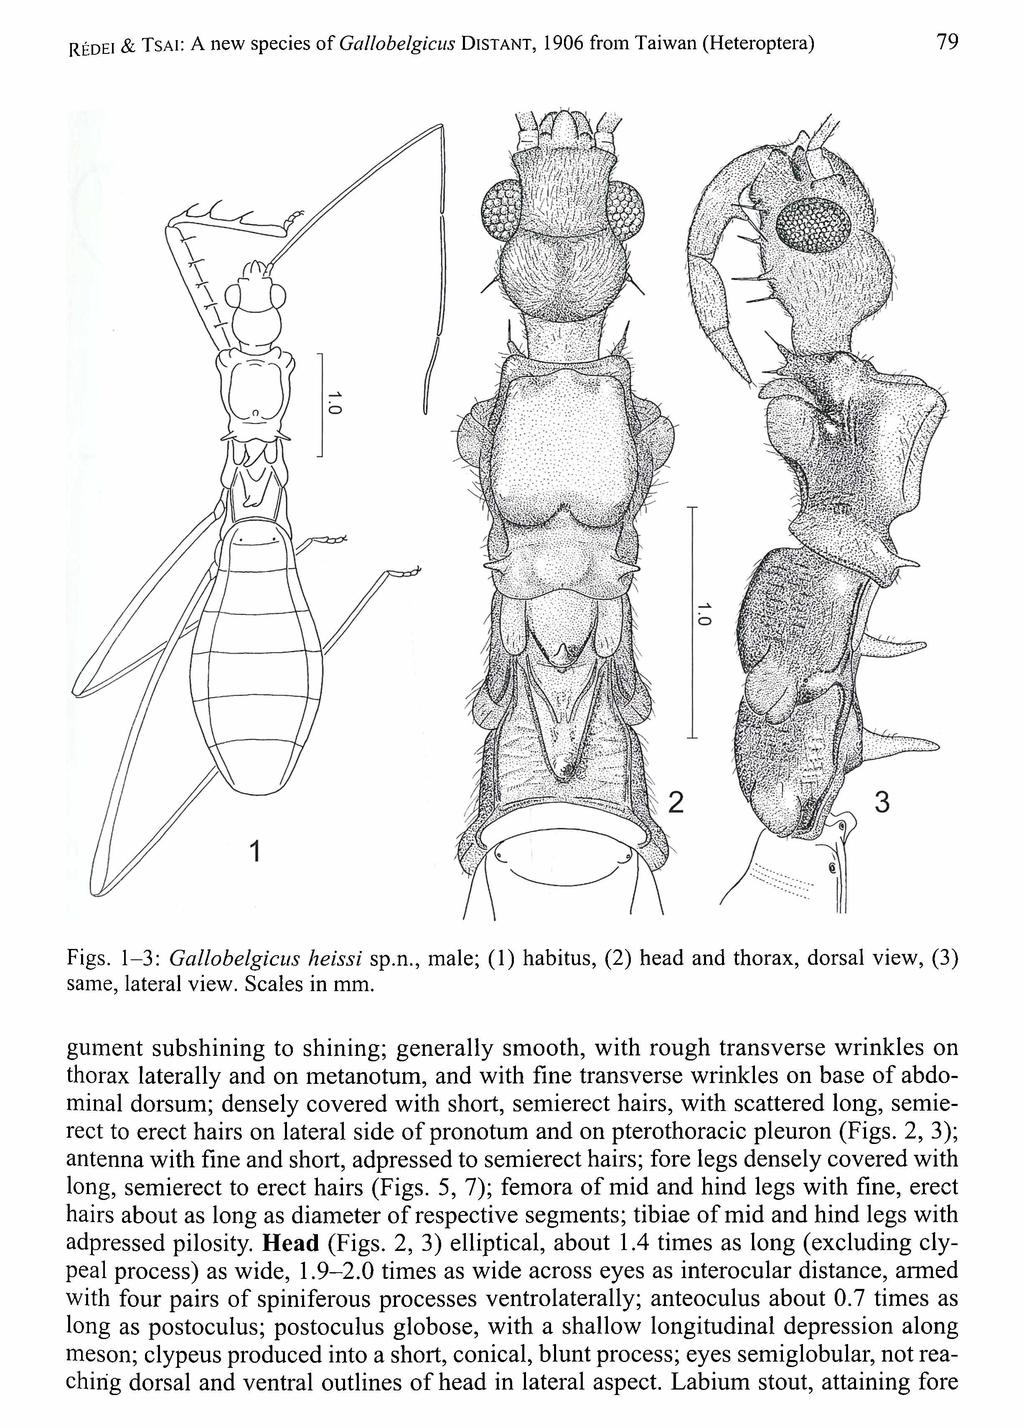 R edei & T s a i: A new species o f Gallobelgicus D i s t a n t, 1906 from Taiwan (Heteroptera) 79 Figs. 1-3: Gallobelgicus heissi sp.n., male; (1) habitus, (2) head and thorax, dorsal view, (3) same, lateral view.